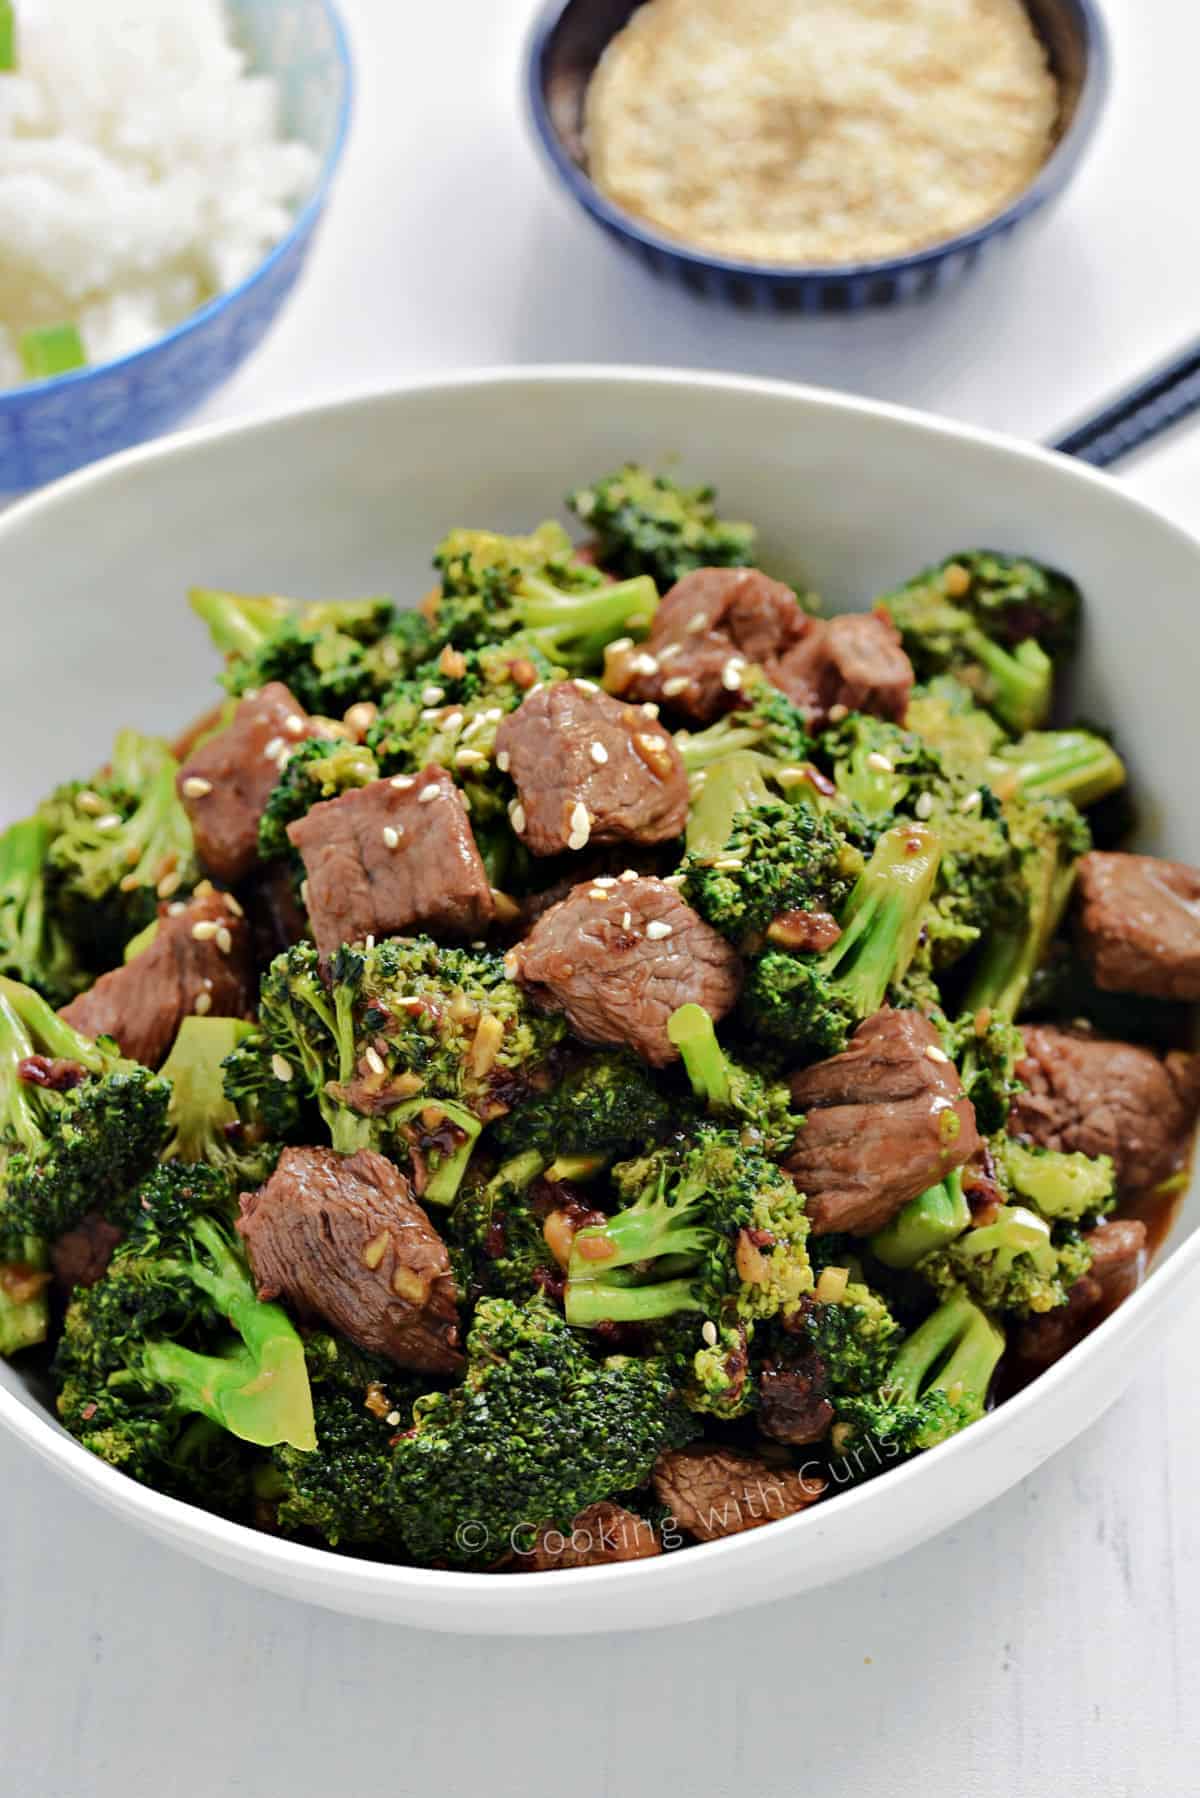 Beef and Broccoli with toasted sesame seeds in a large serving bowl.